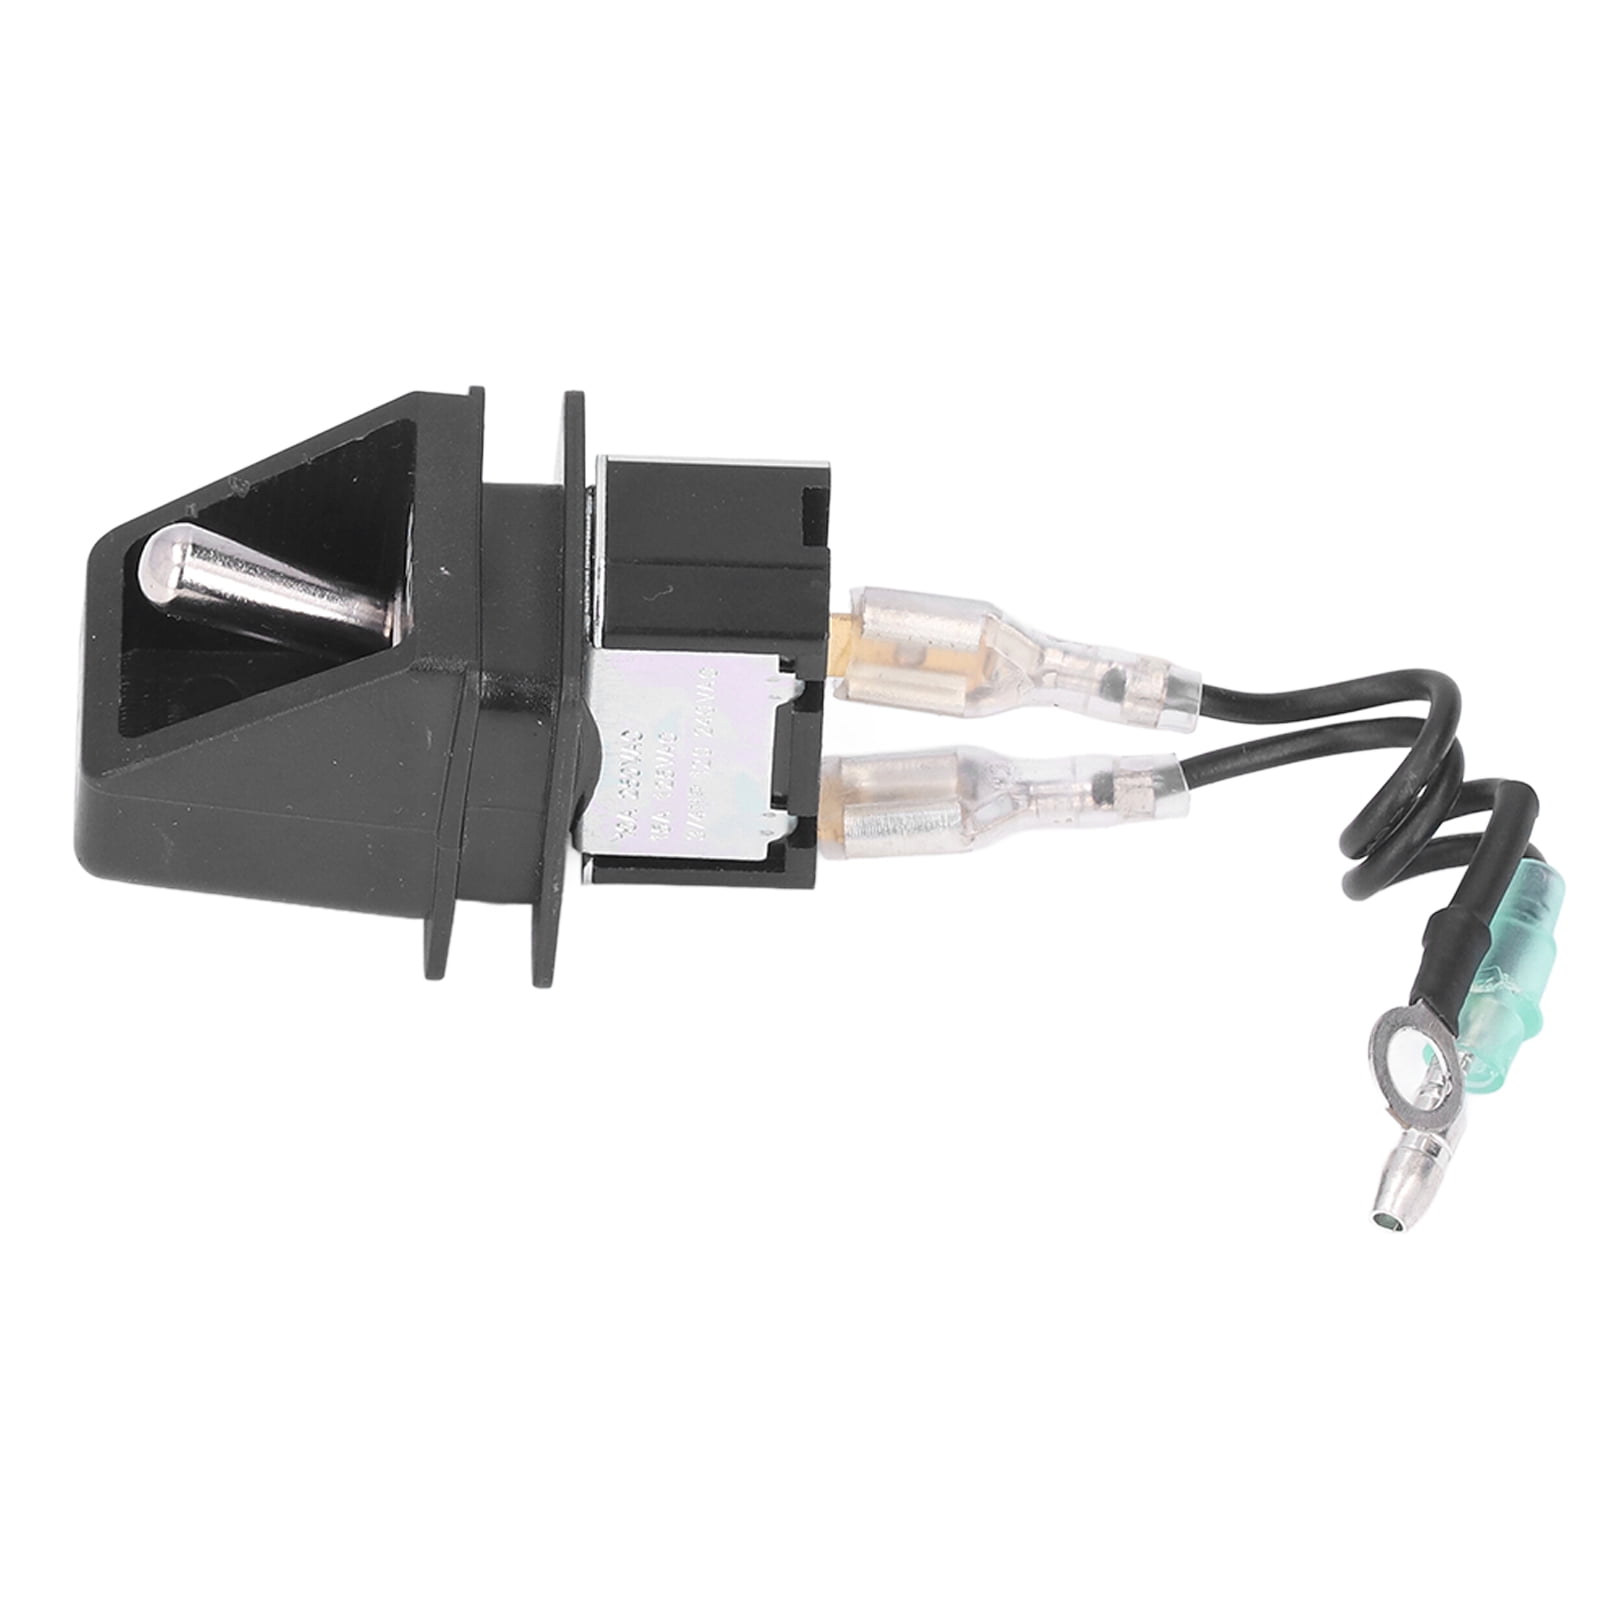 Outboard Motor Stop Switch 87‑91941A8 Stainless Steel Marine Boat Motor Emergency Kill Stop Switch Engine Remote Control Box 